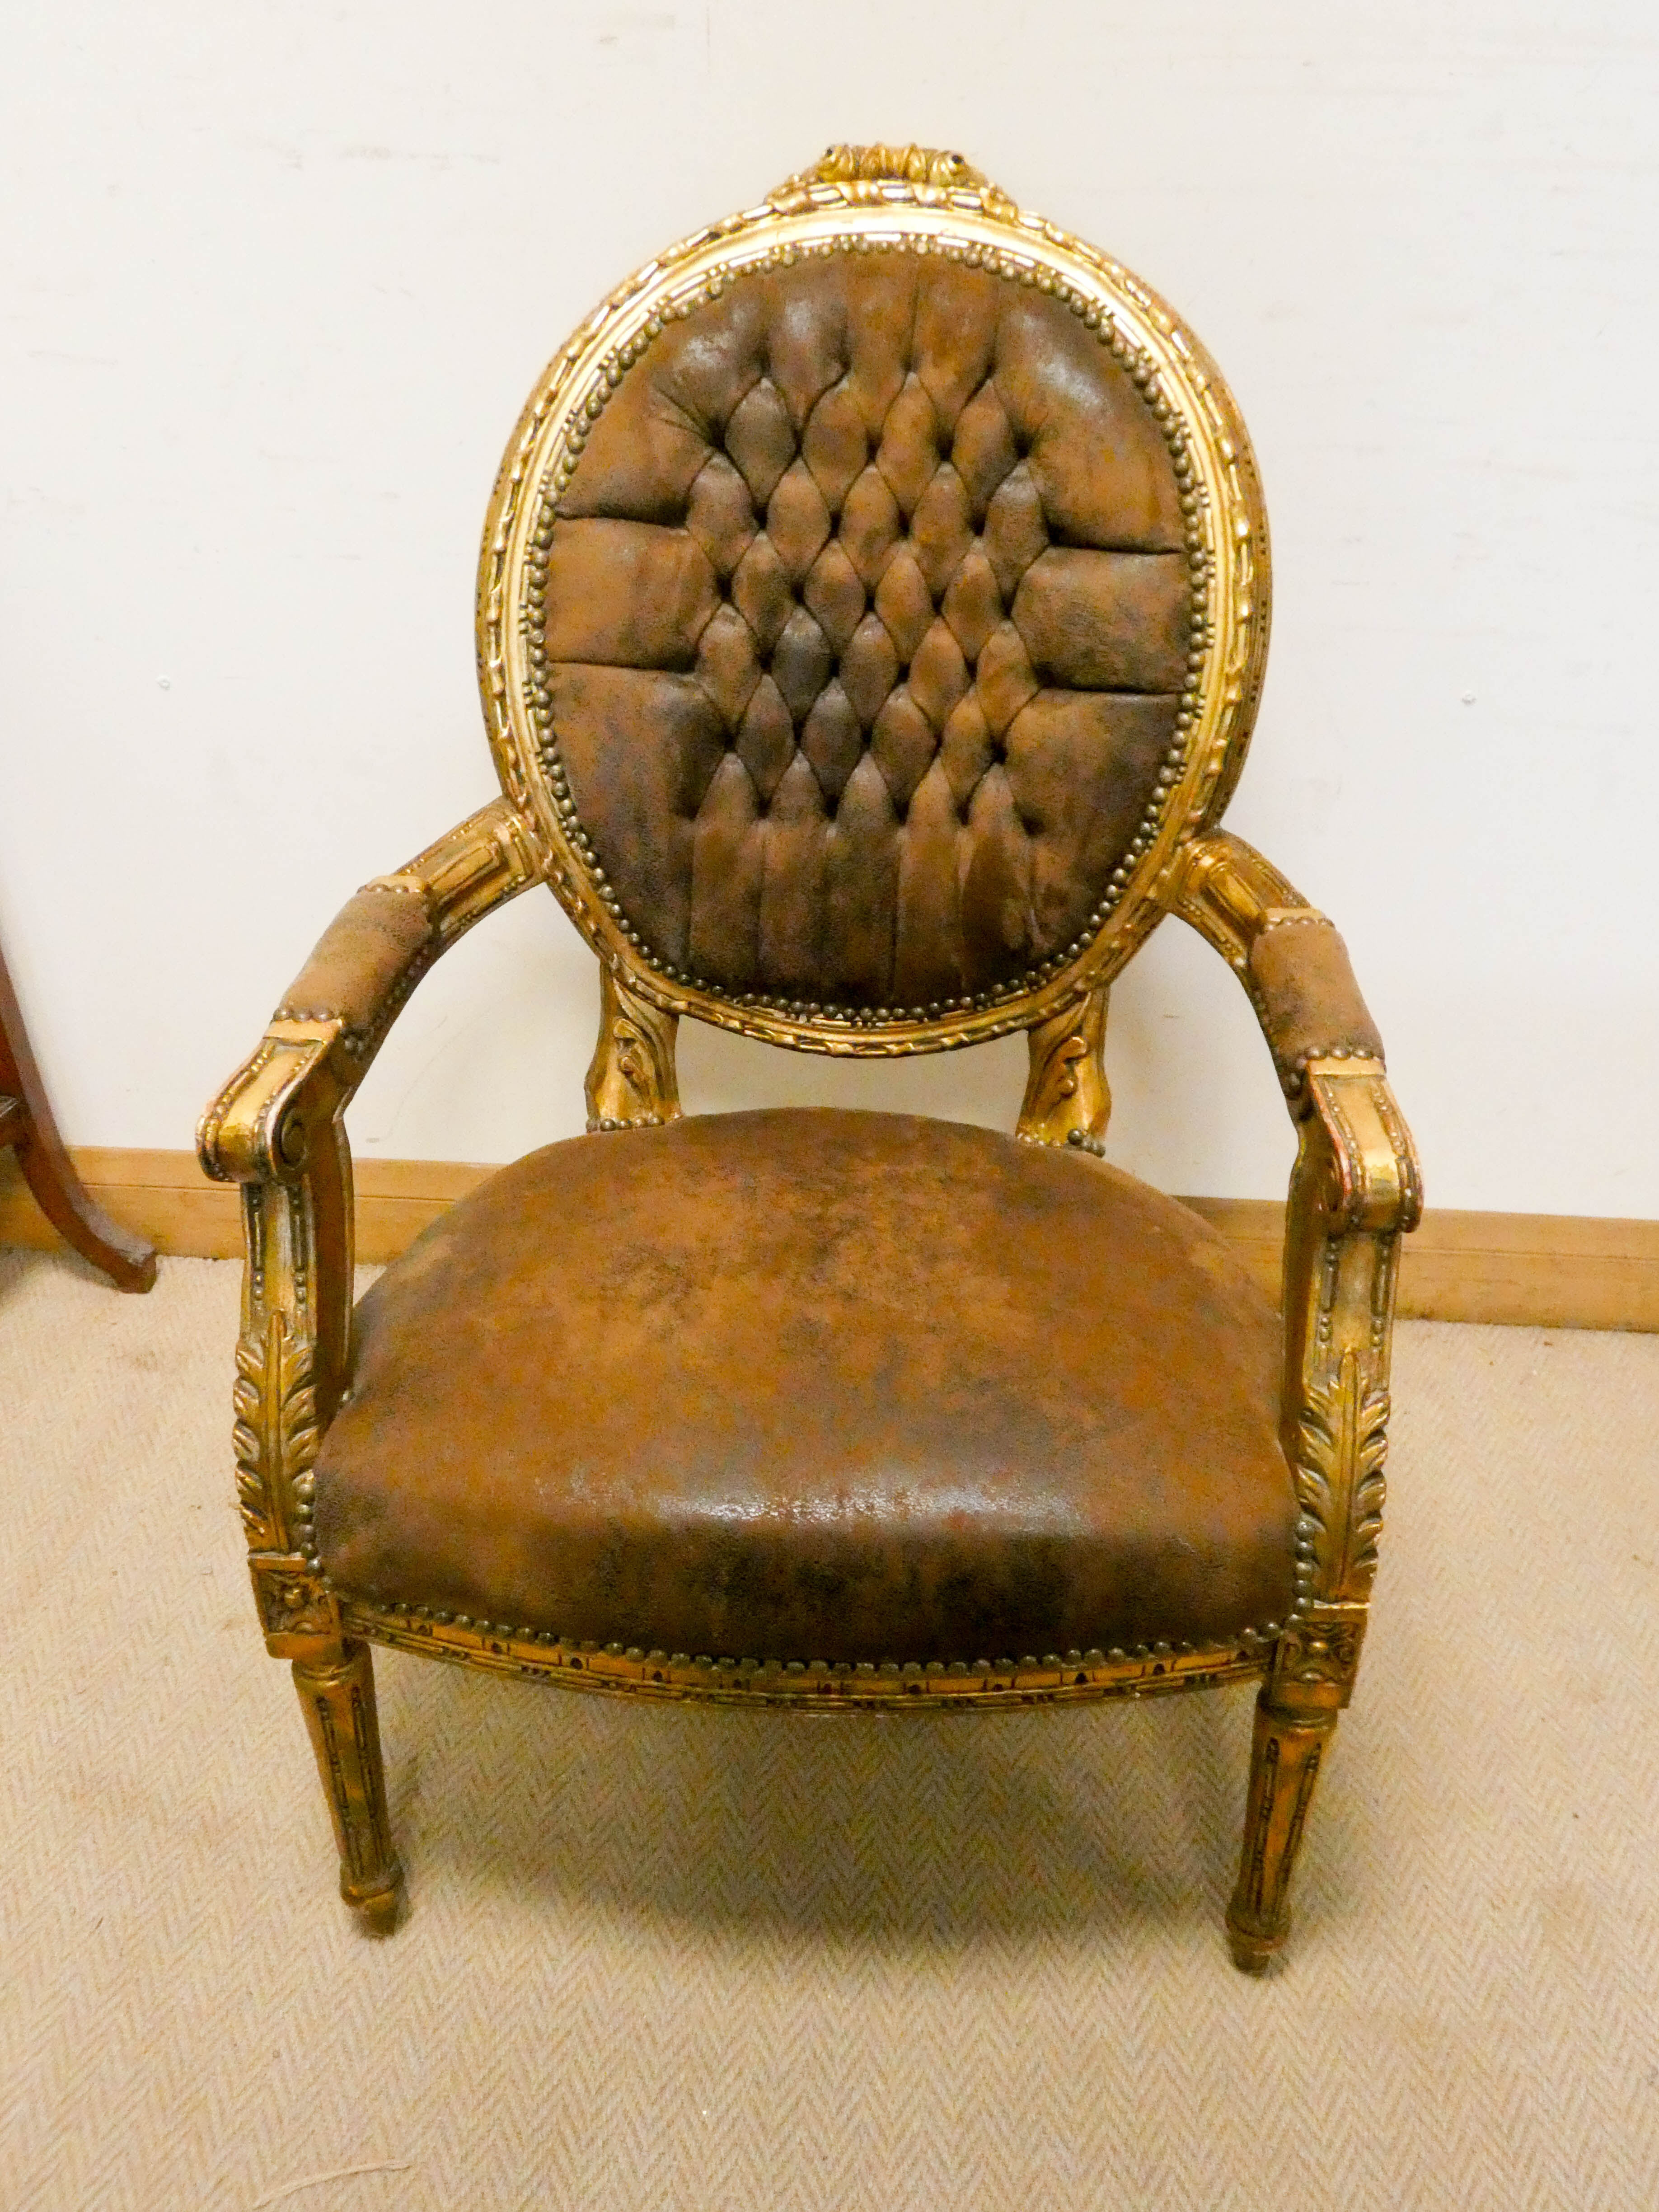 A French gilt framed elbow chair with brown leather upholstered seat and buttoned leather back - Image 2 of 2